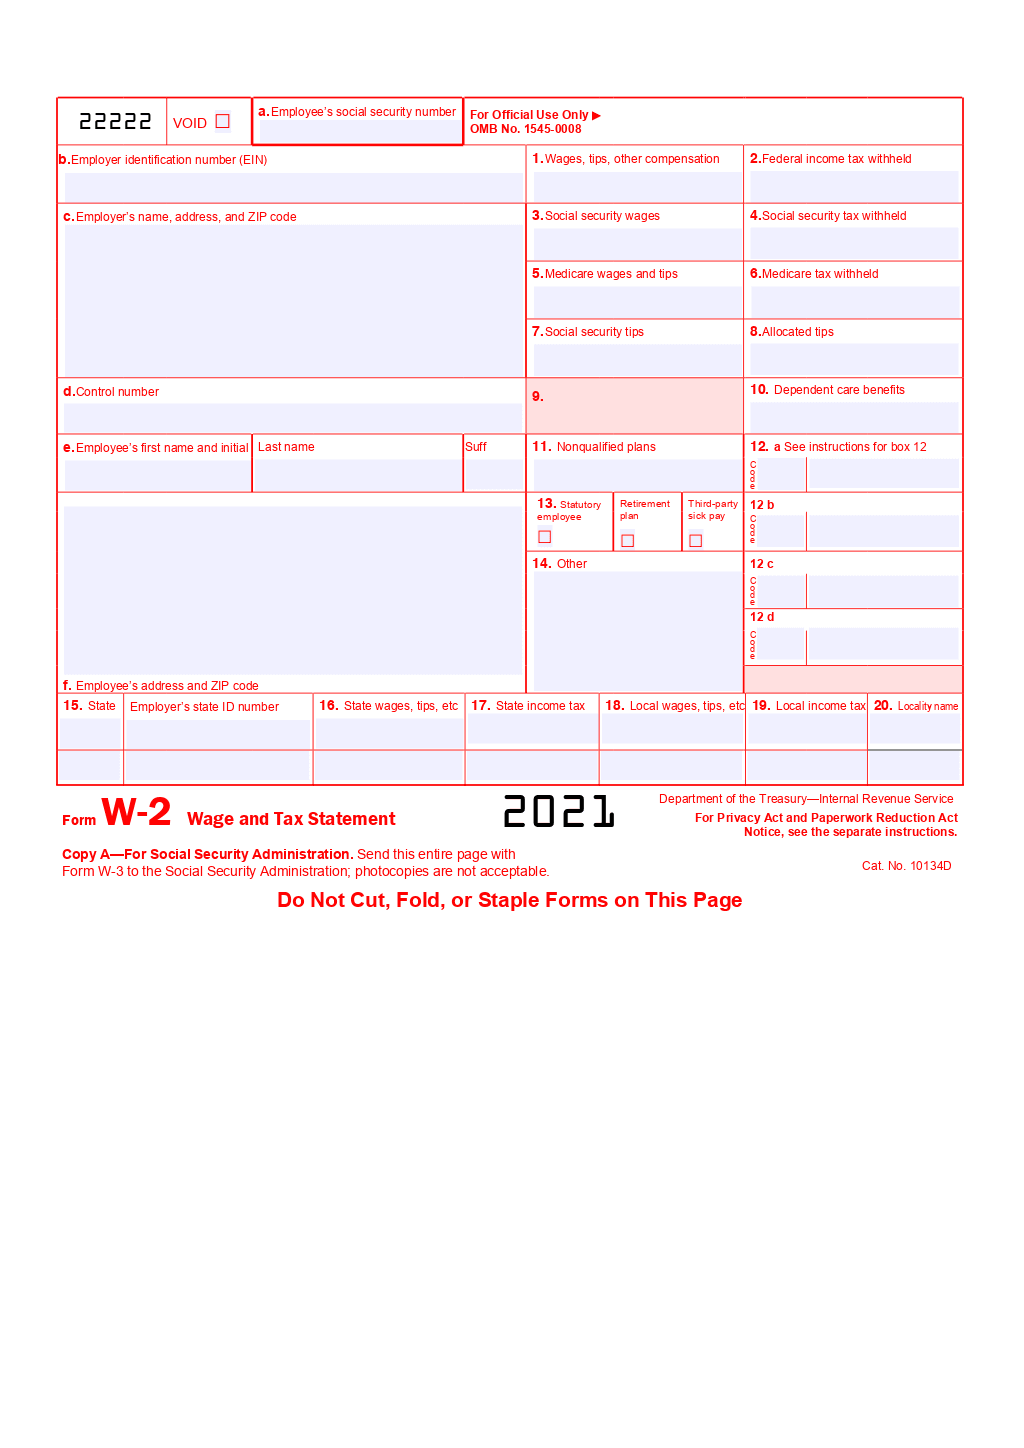 Form W-2 (Wage And Tax Statement) Template pertaining to Create W2 Forms